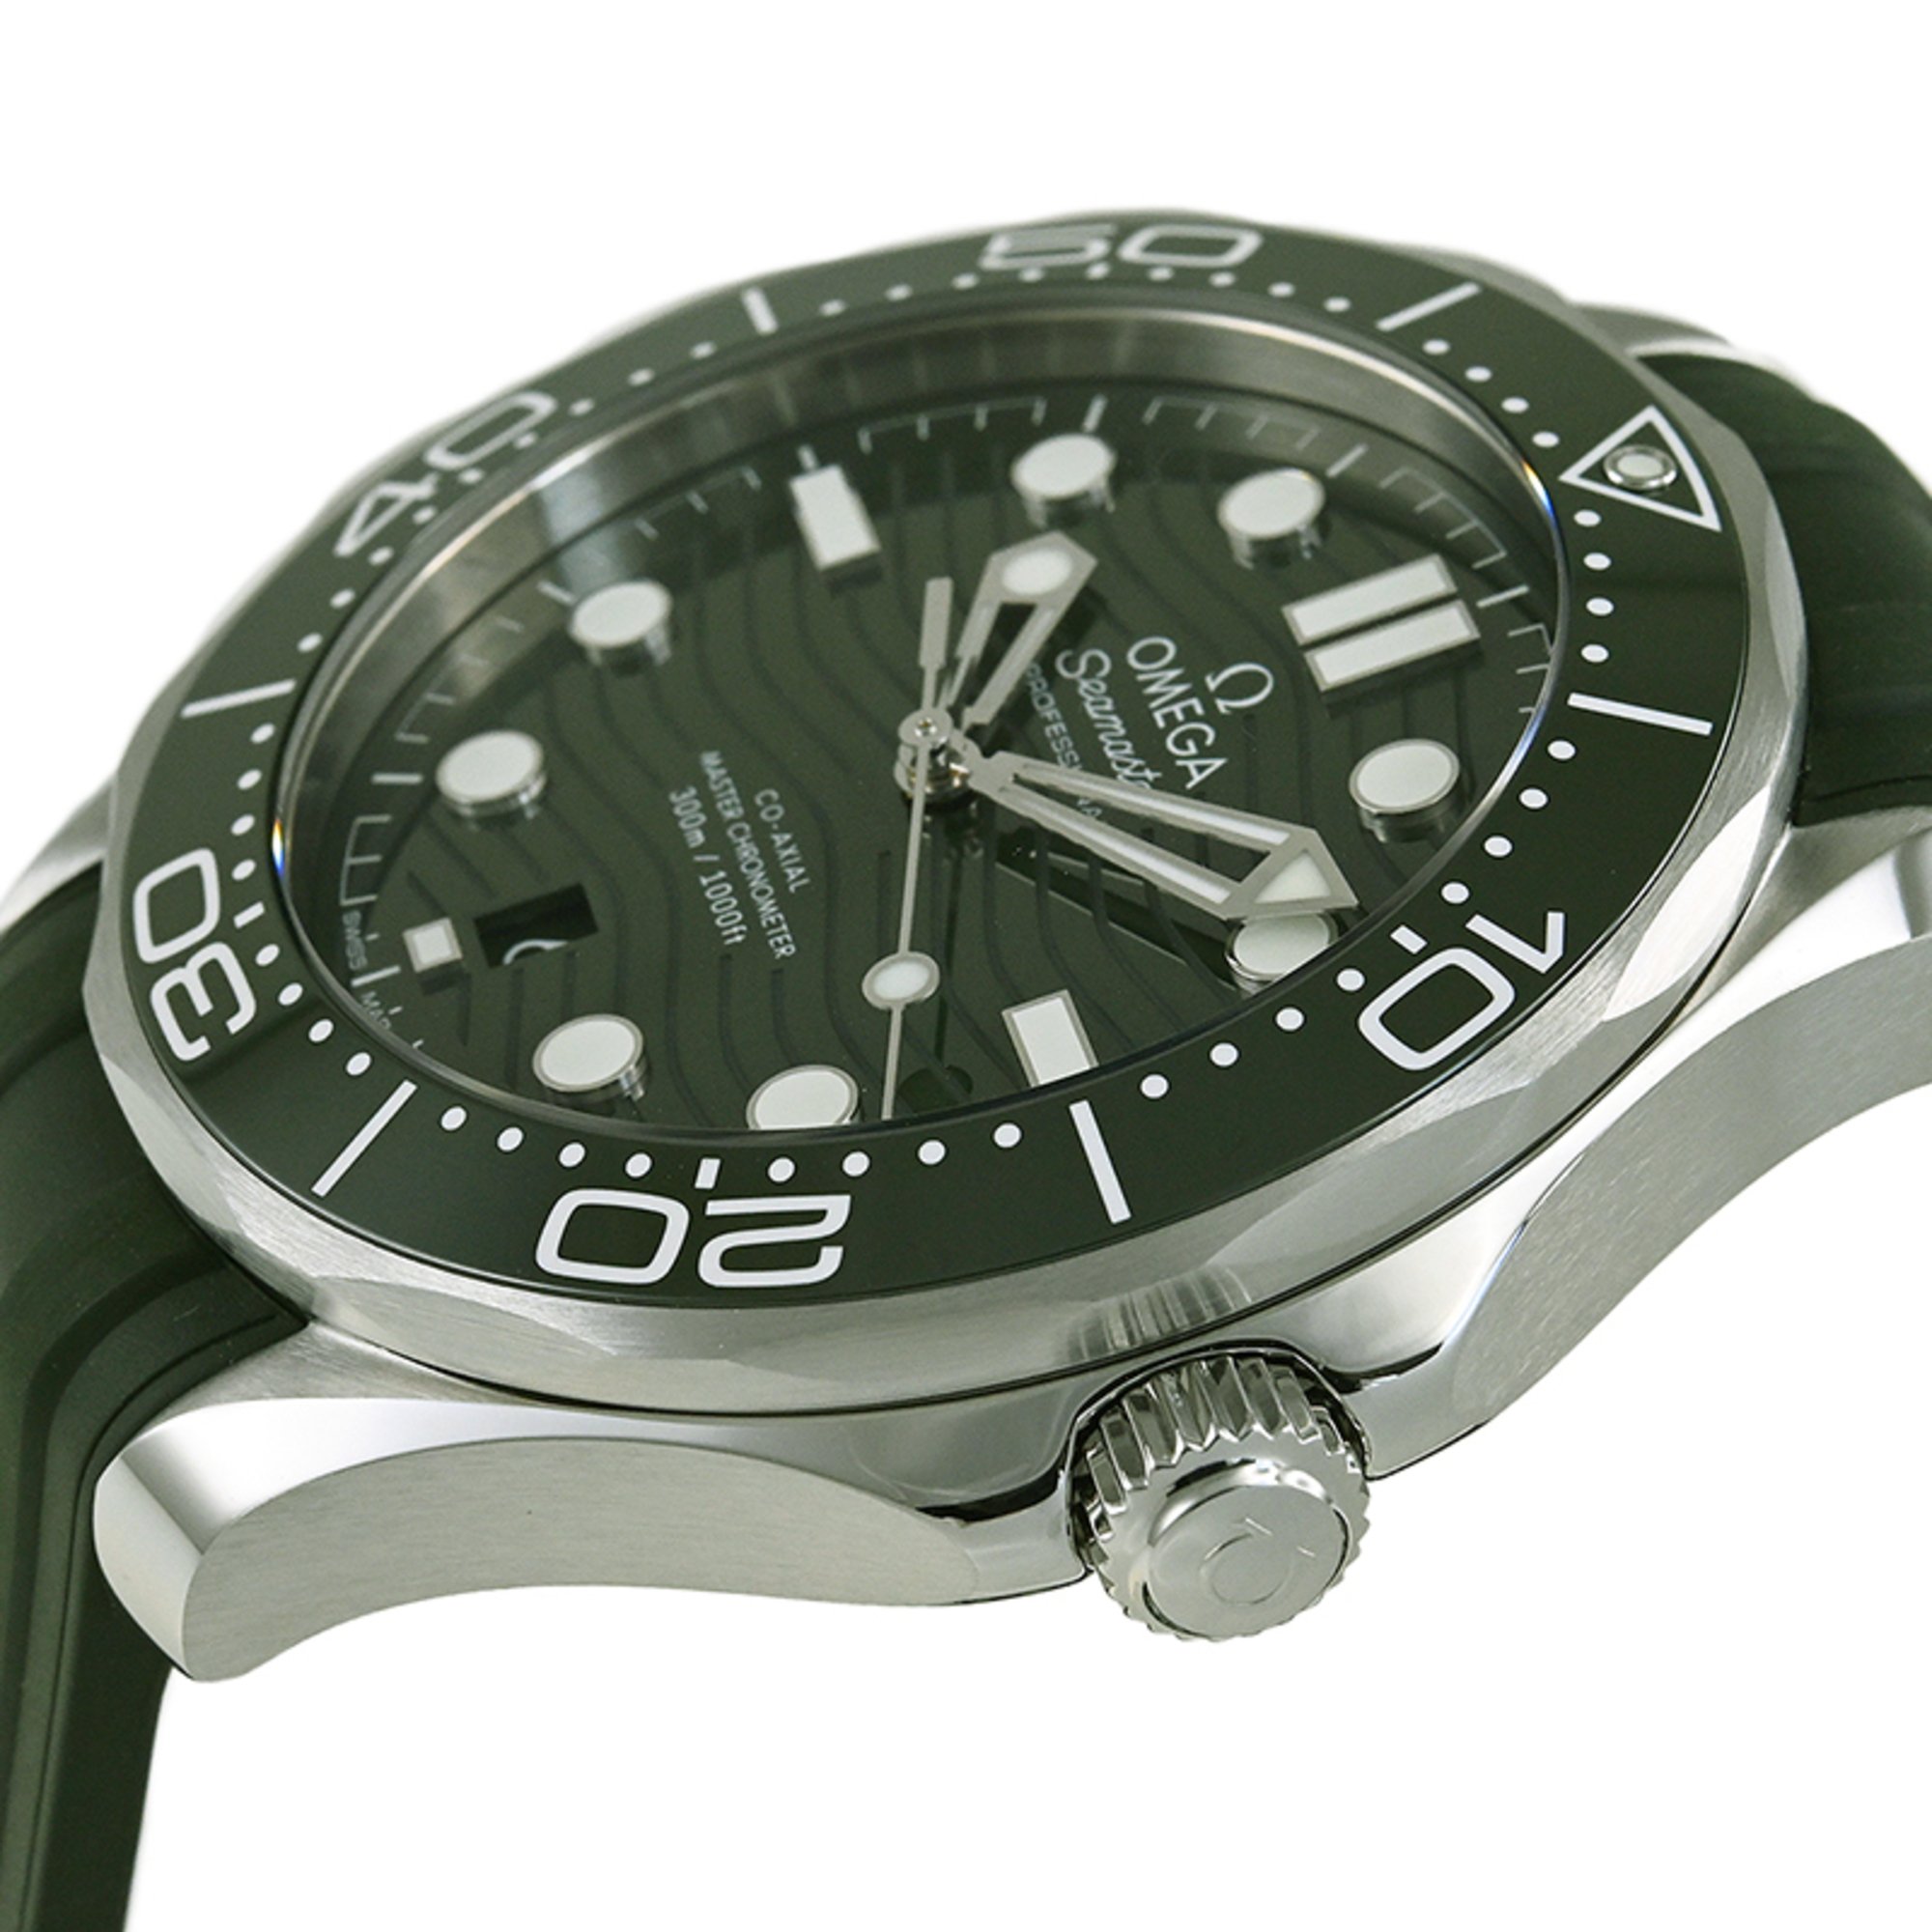 OMEGA Seamaster Diver 300M Watch Co-Axial Master Chronometer 42MM 210.32.42.20.10.001